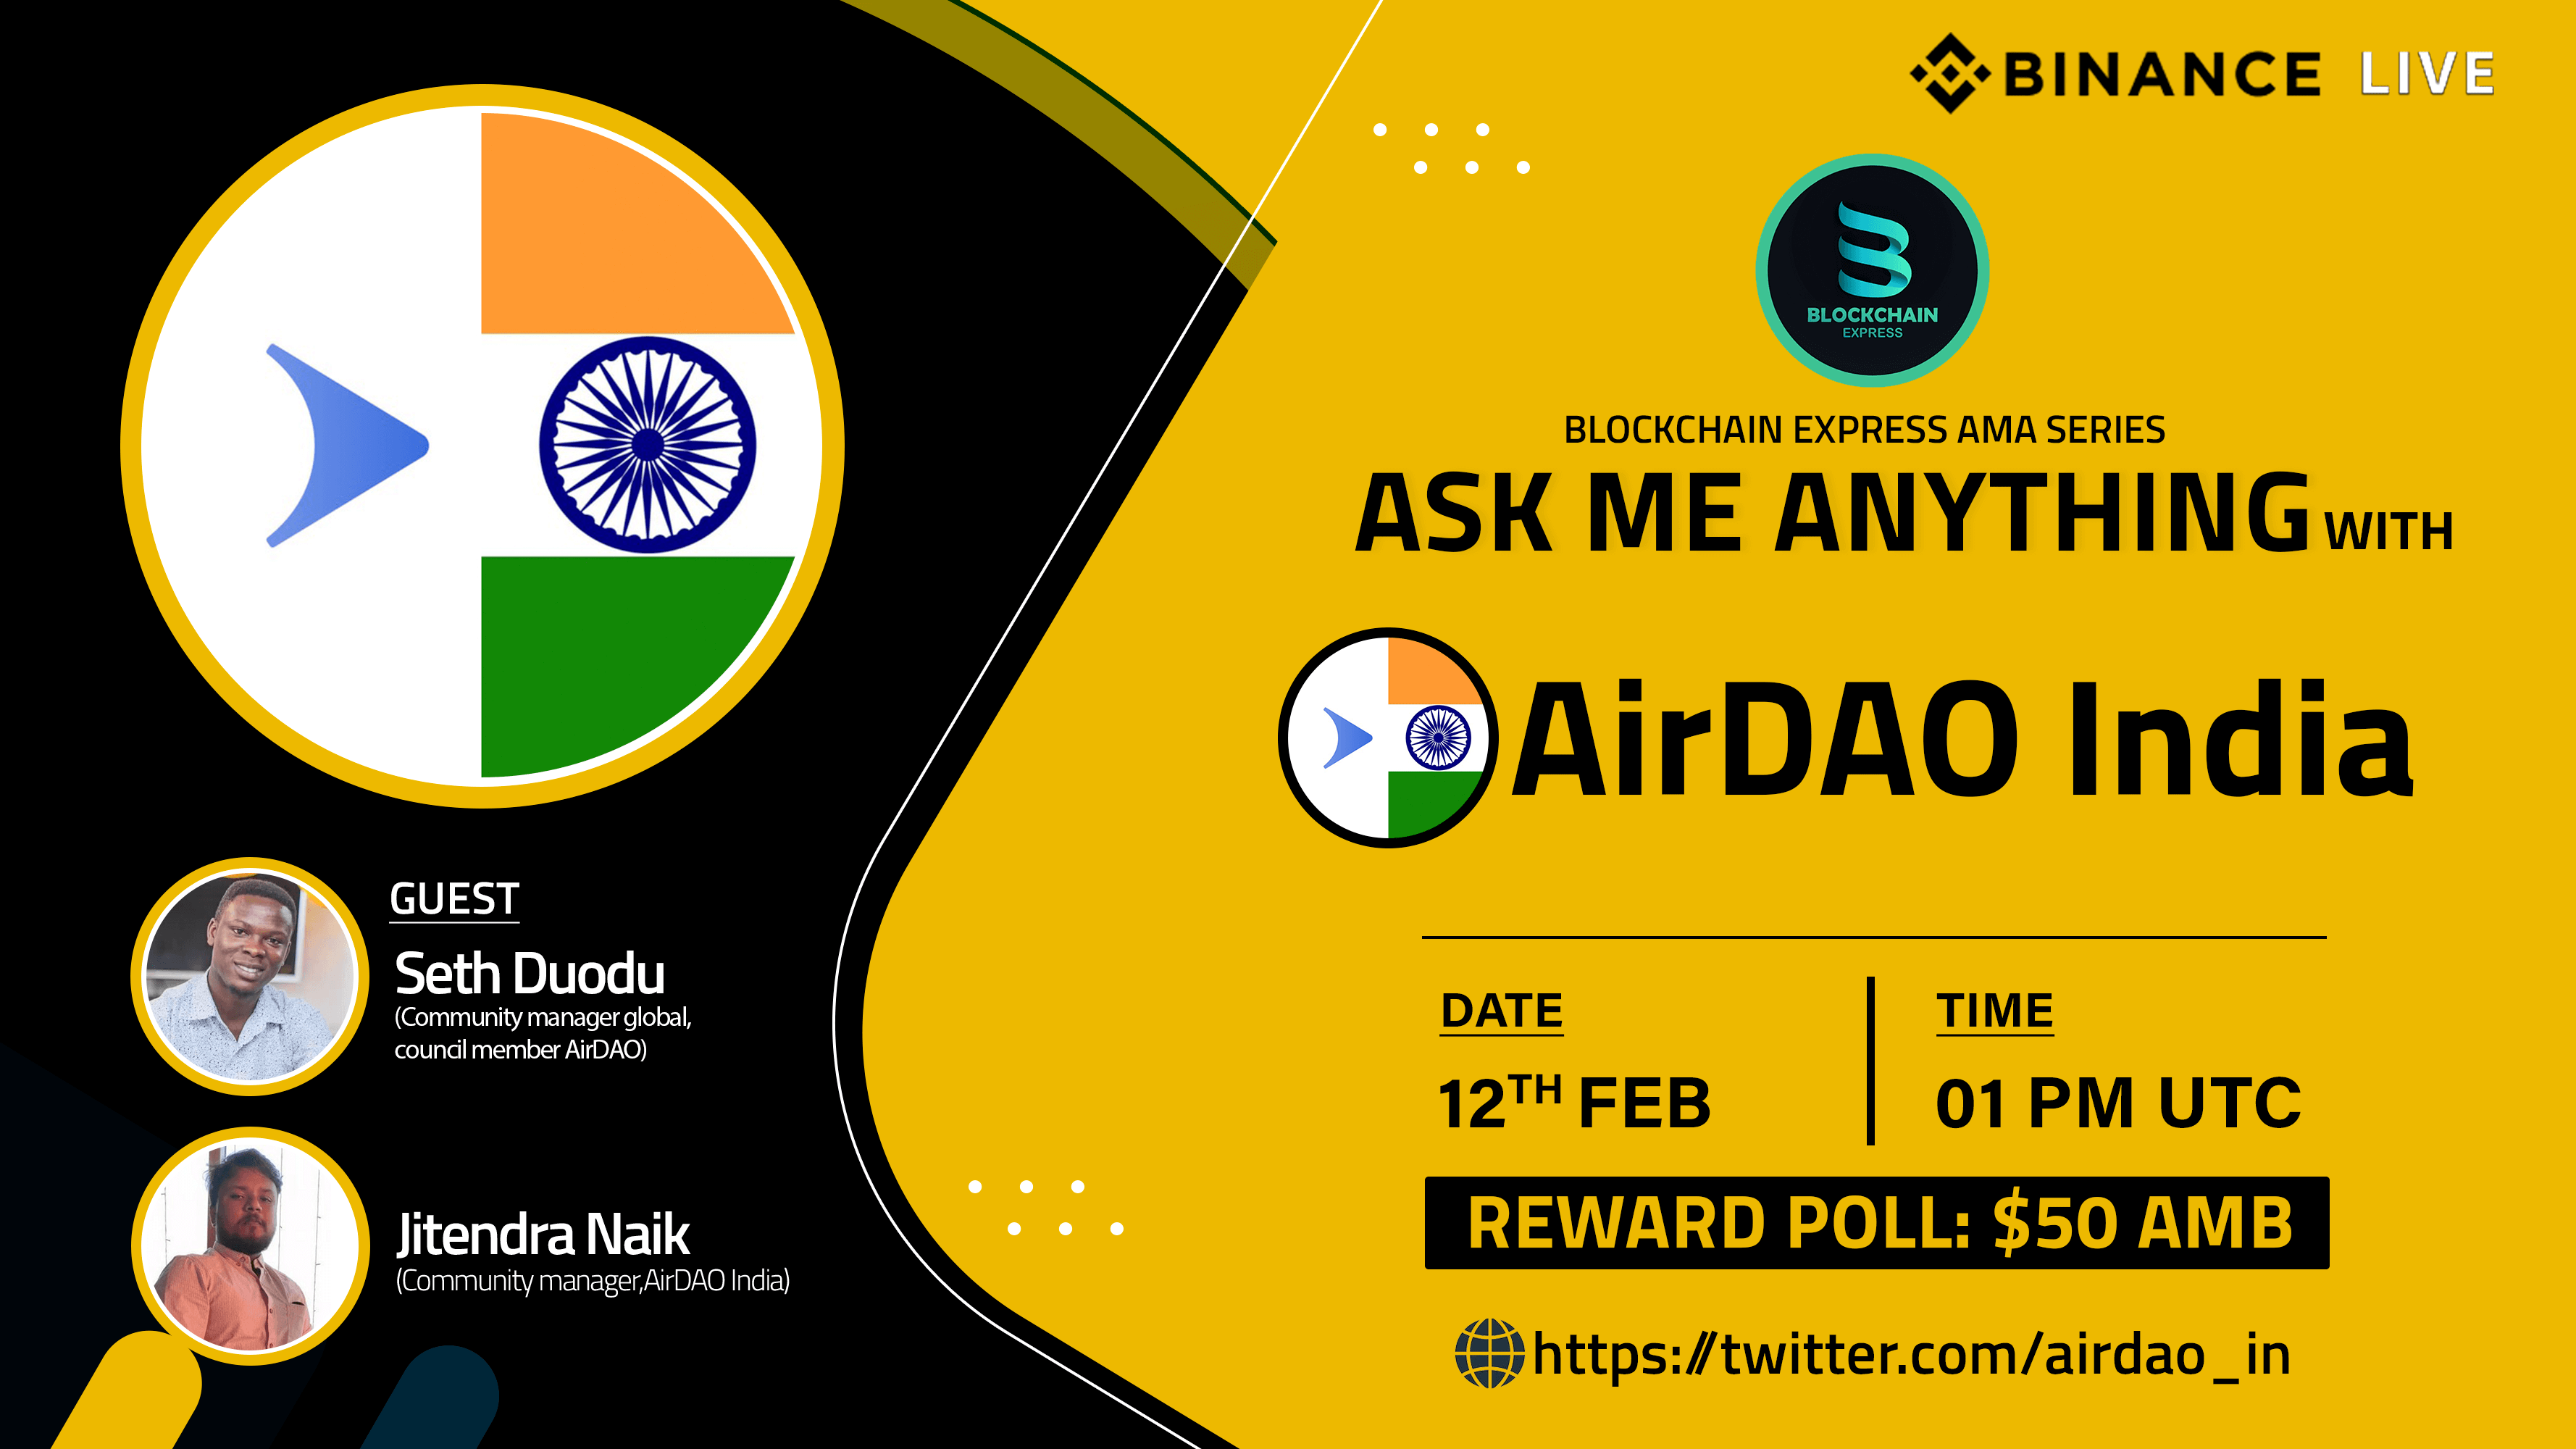 ₿lockchain Express will be hosting an session with" AirDAO India "